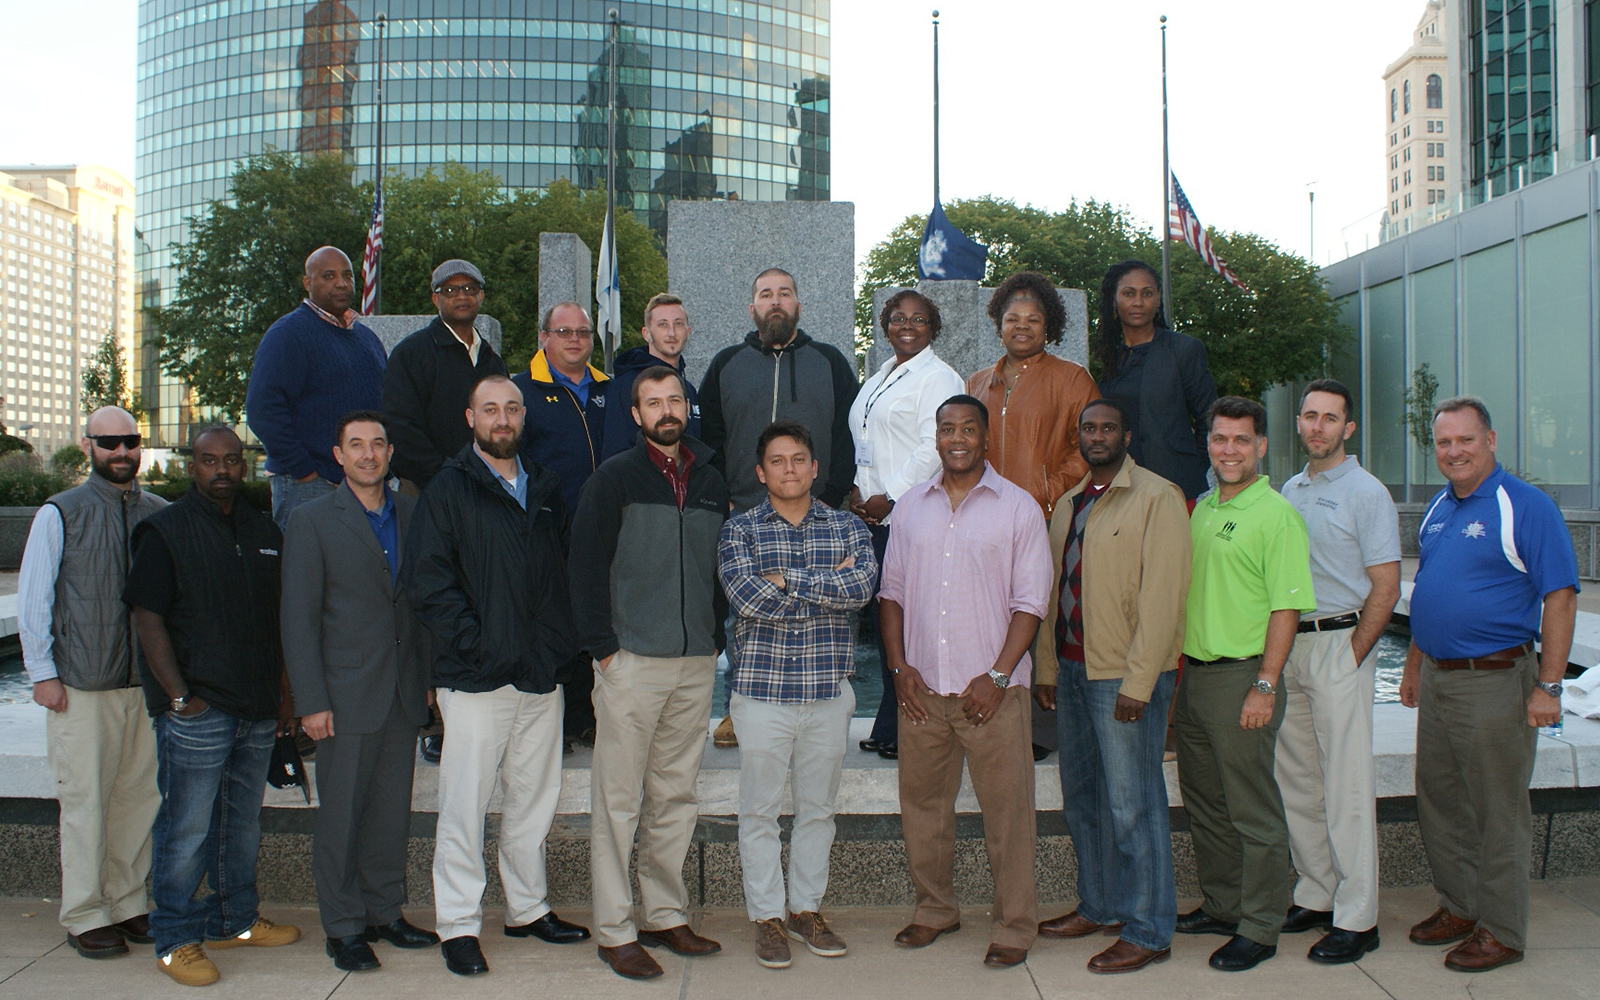 The 2016 Entrepreneurship Bootcamp for Veterans with Disabilities (EBV) Class. UConn's EBV is a 10-day program that gives veterans the knowledge, skills and helping hand they need to create their own businesses. (Lisa Ducharme)